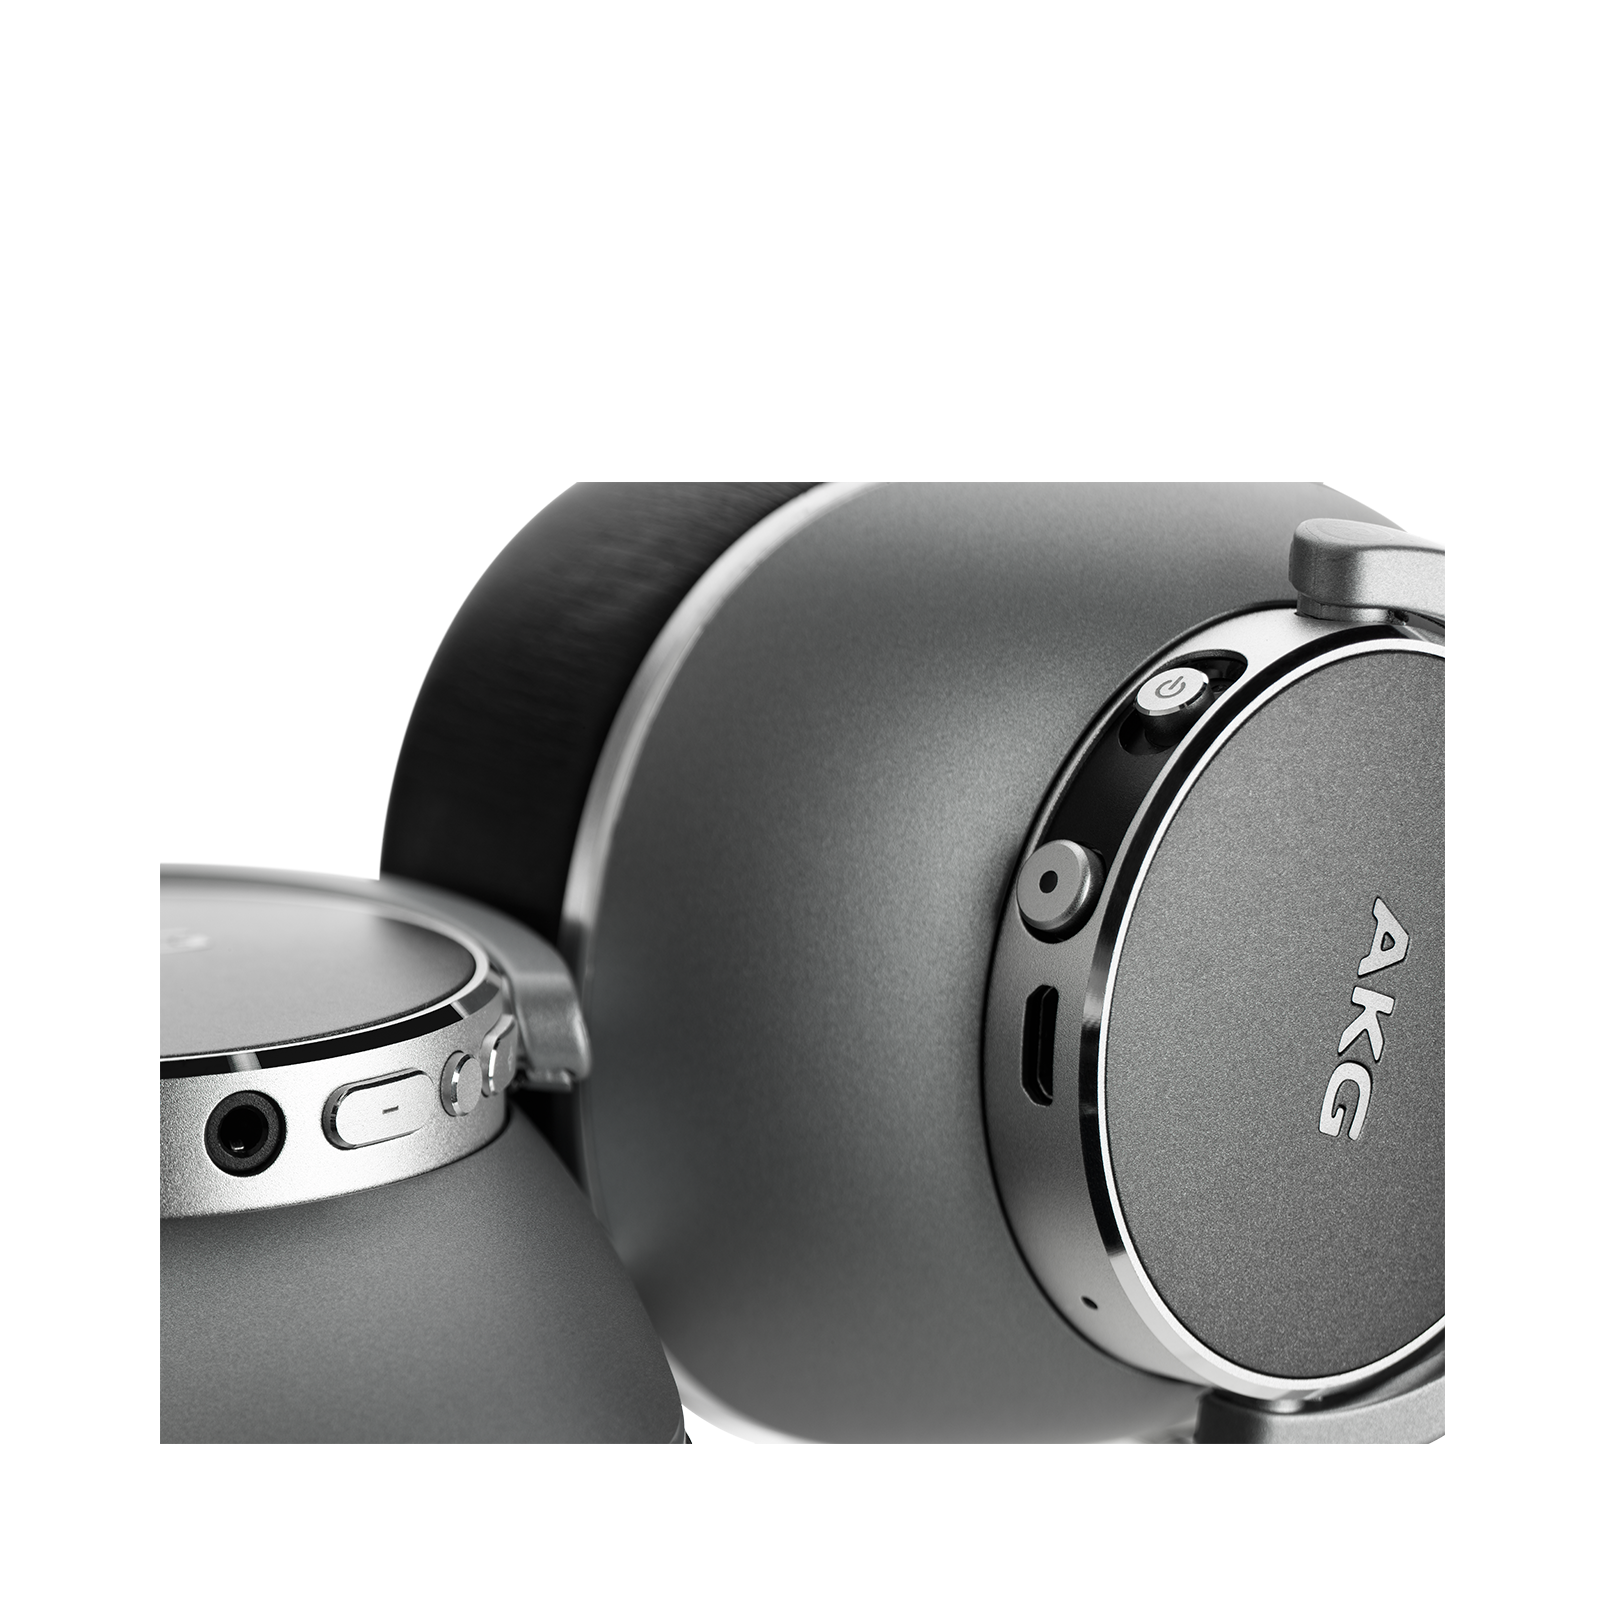 AKG_Product-Image_N700NC-Wireless_Detail-View-02-1605x1605px.png